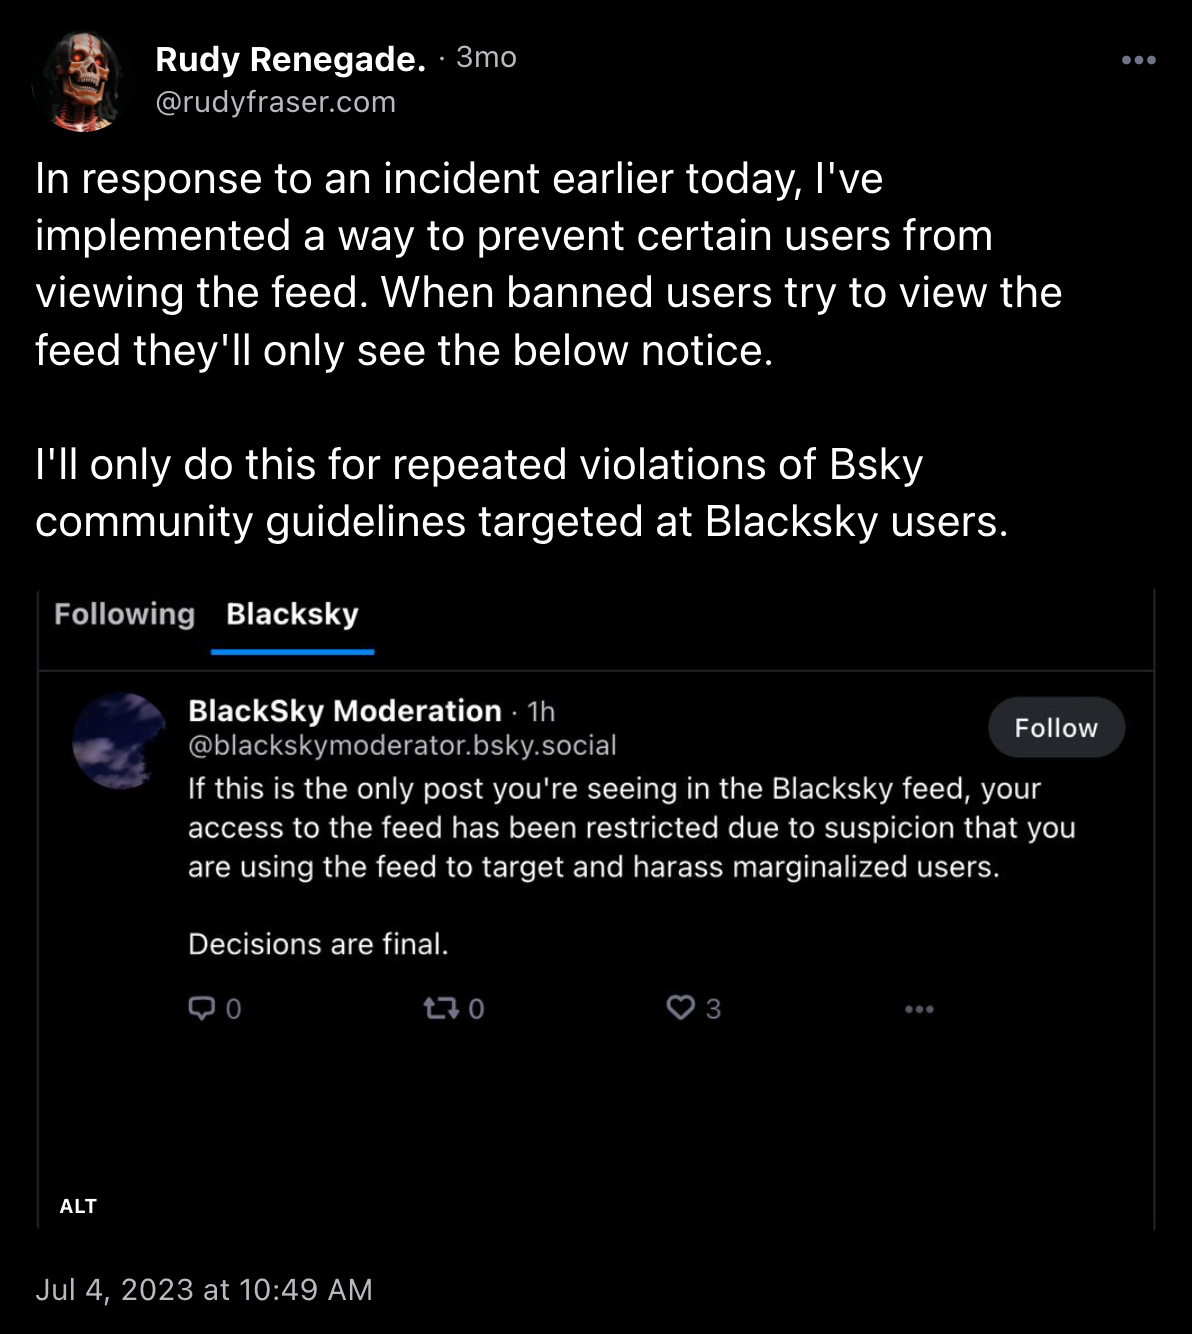 Post from @rudyfraser.com, saying "In response to an incident earlier today, I've implemented a way to prevent certain users from viewing the feed. When banned users try to view the feed they'll only see the below notice.  I'll only do this for repeated violations of Bsky community guidelines targeted at Blacksky users."